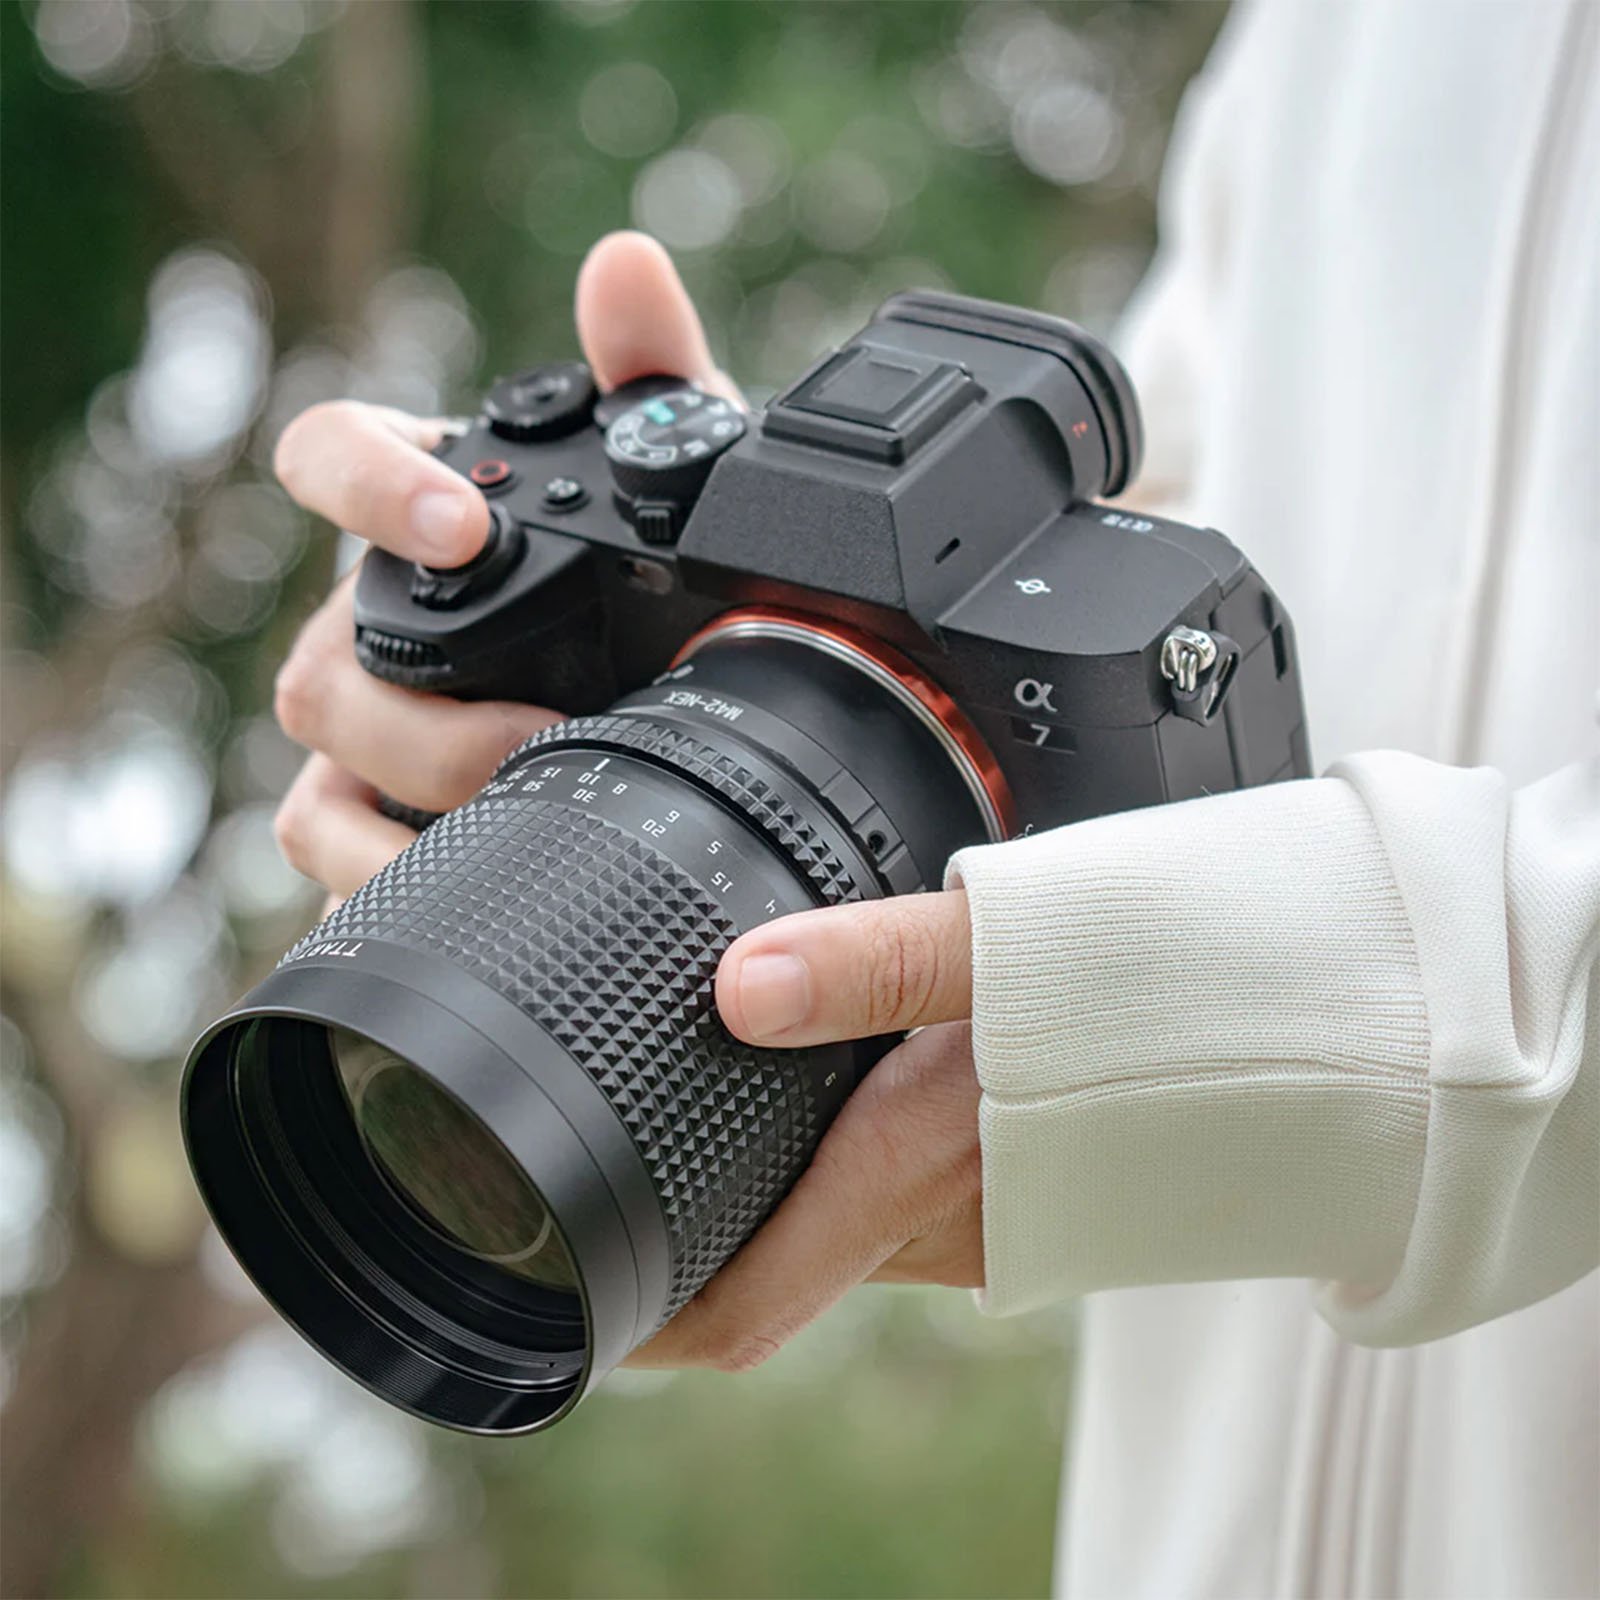 Person holding a digital camera with both hands, wearing a white long-sleeved top. The camera has a large attached lens, and the background is slightly blurred, showing some greenery.